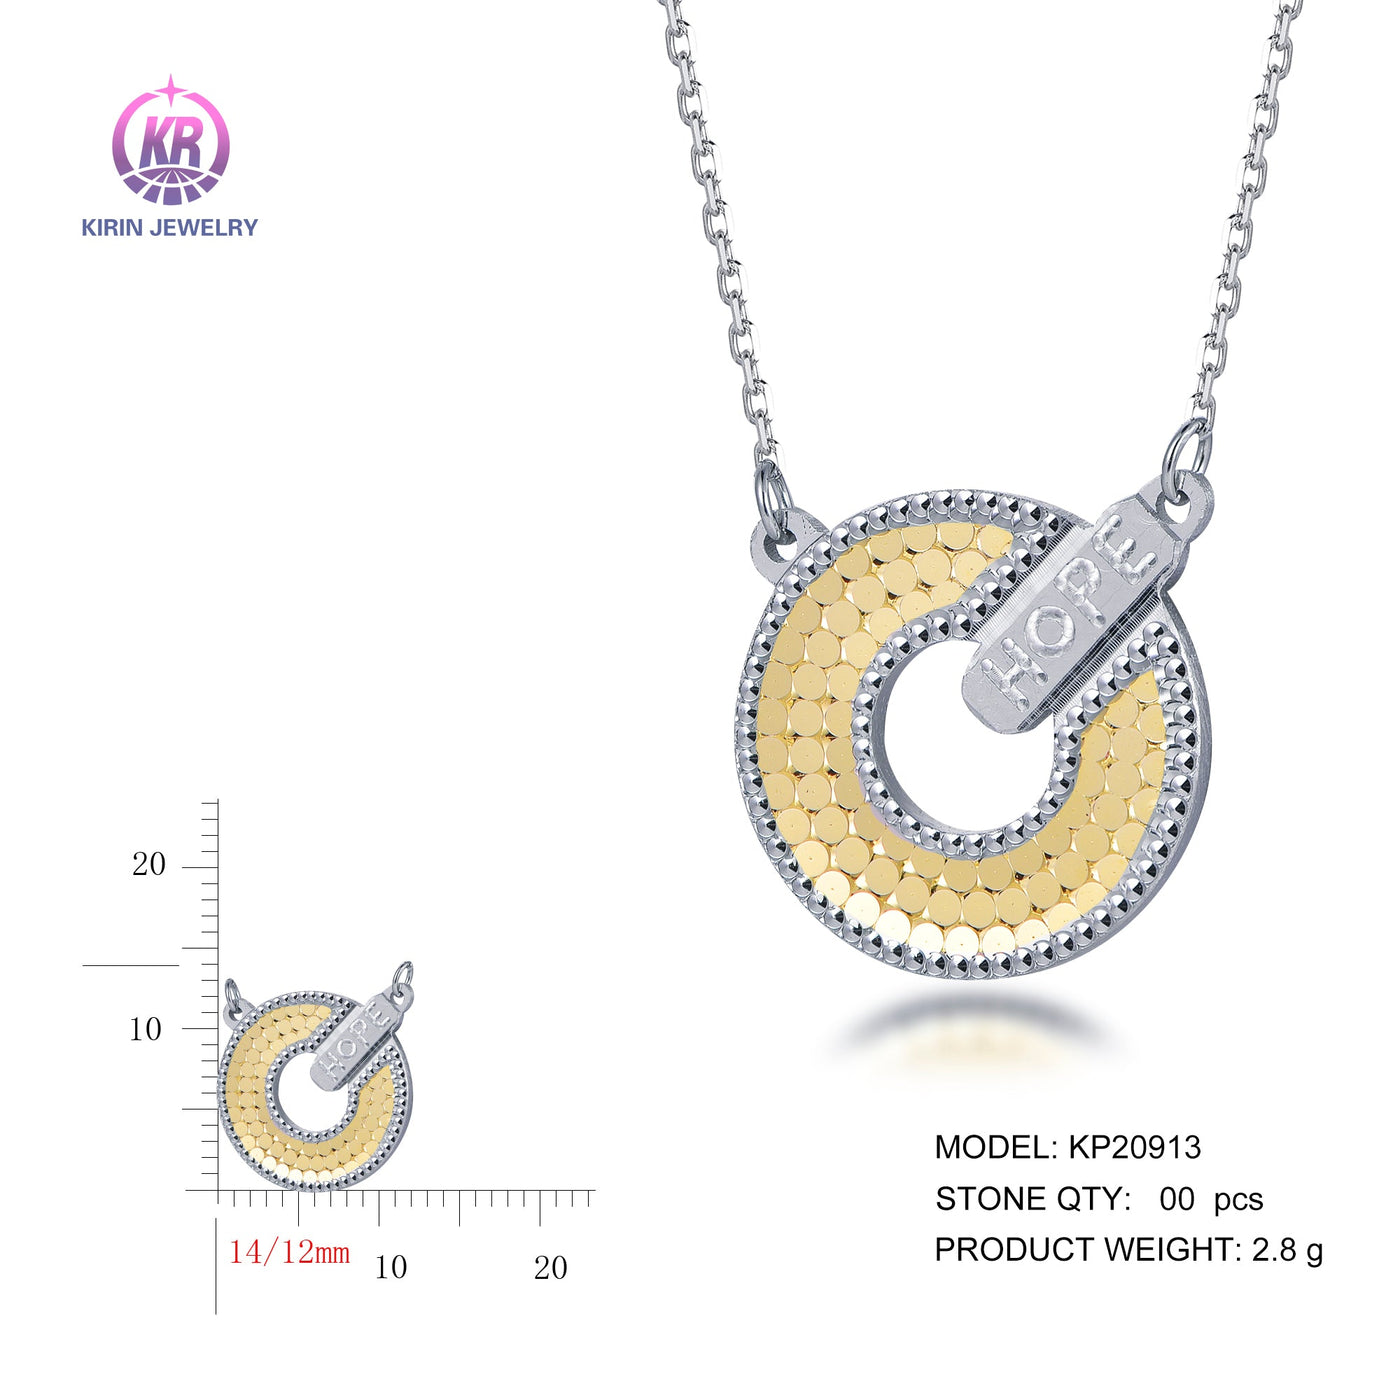 925 silver pendant with 2-tone plating rhodium and 14K gold KP20913 Kirin Jewelry